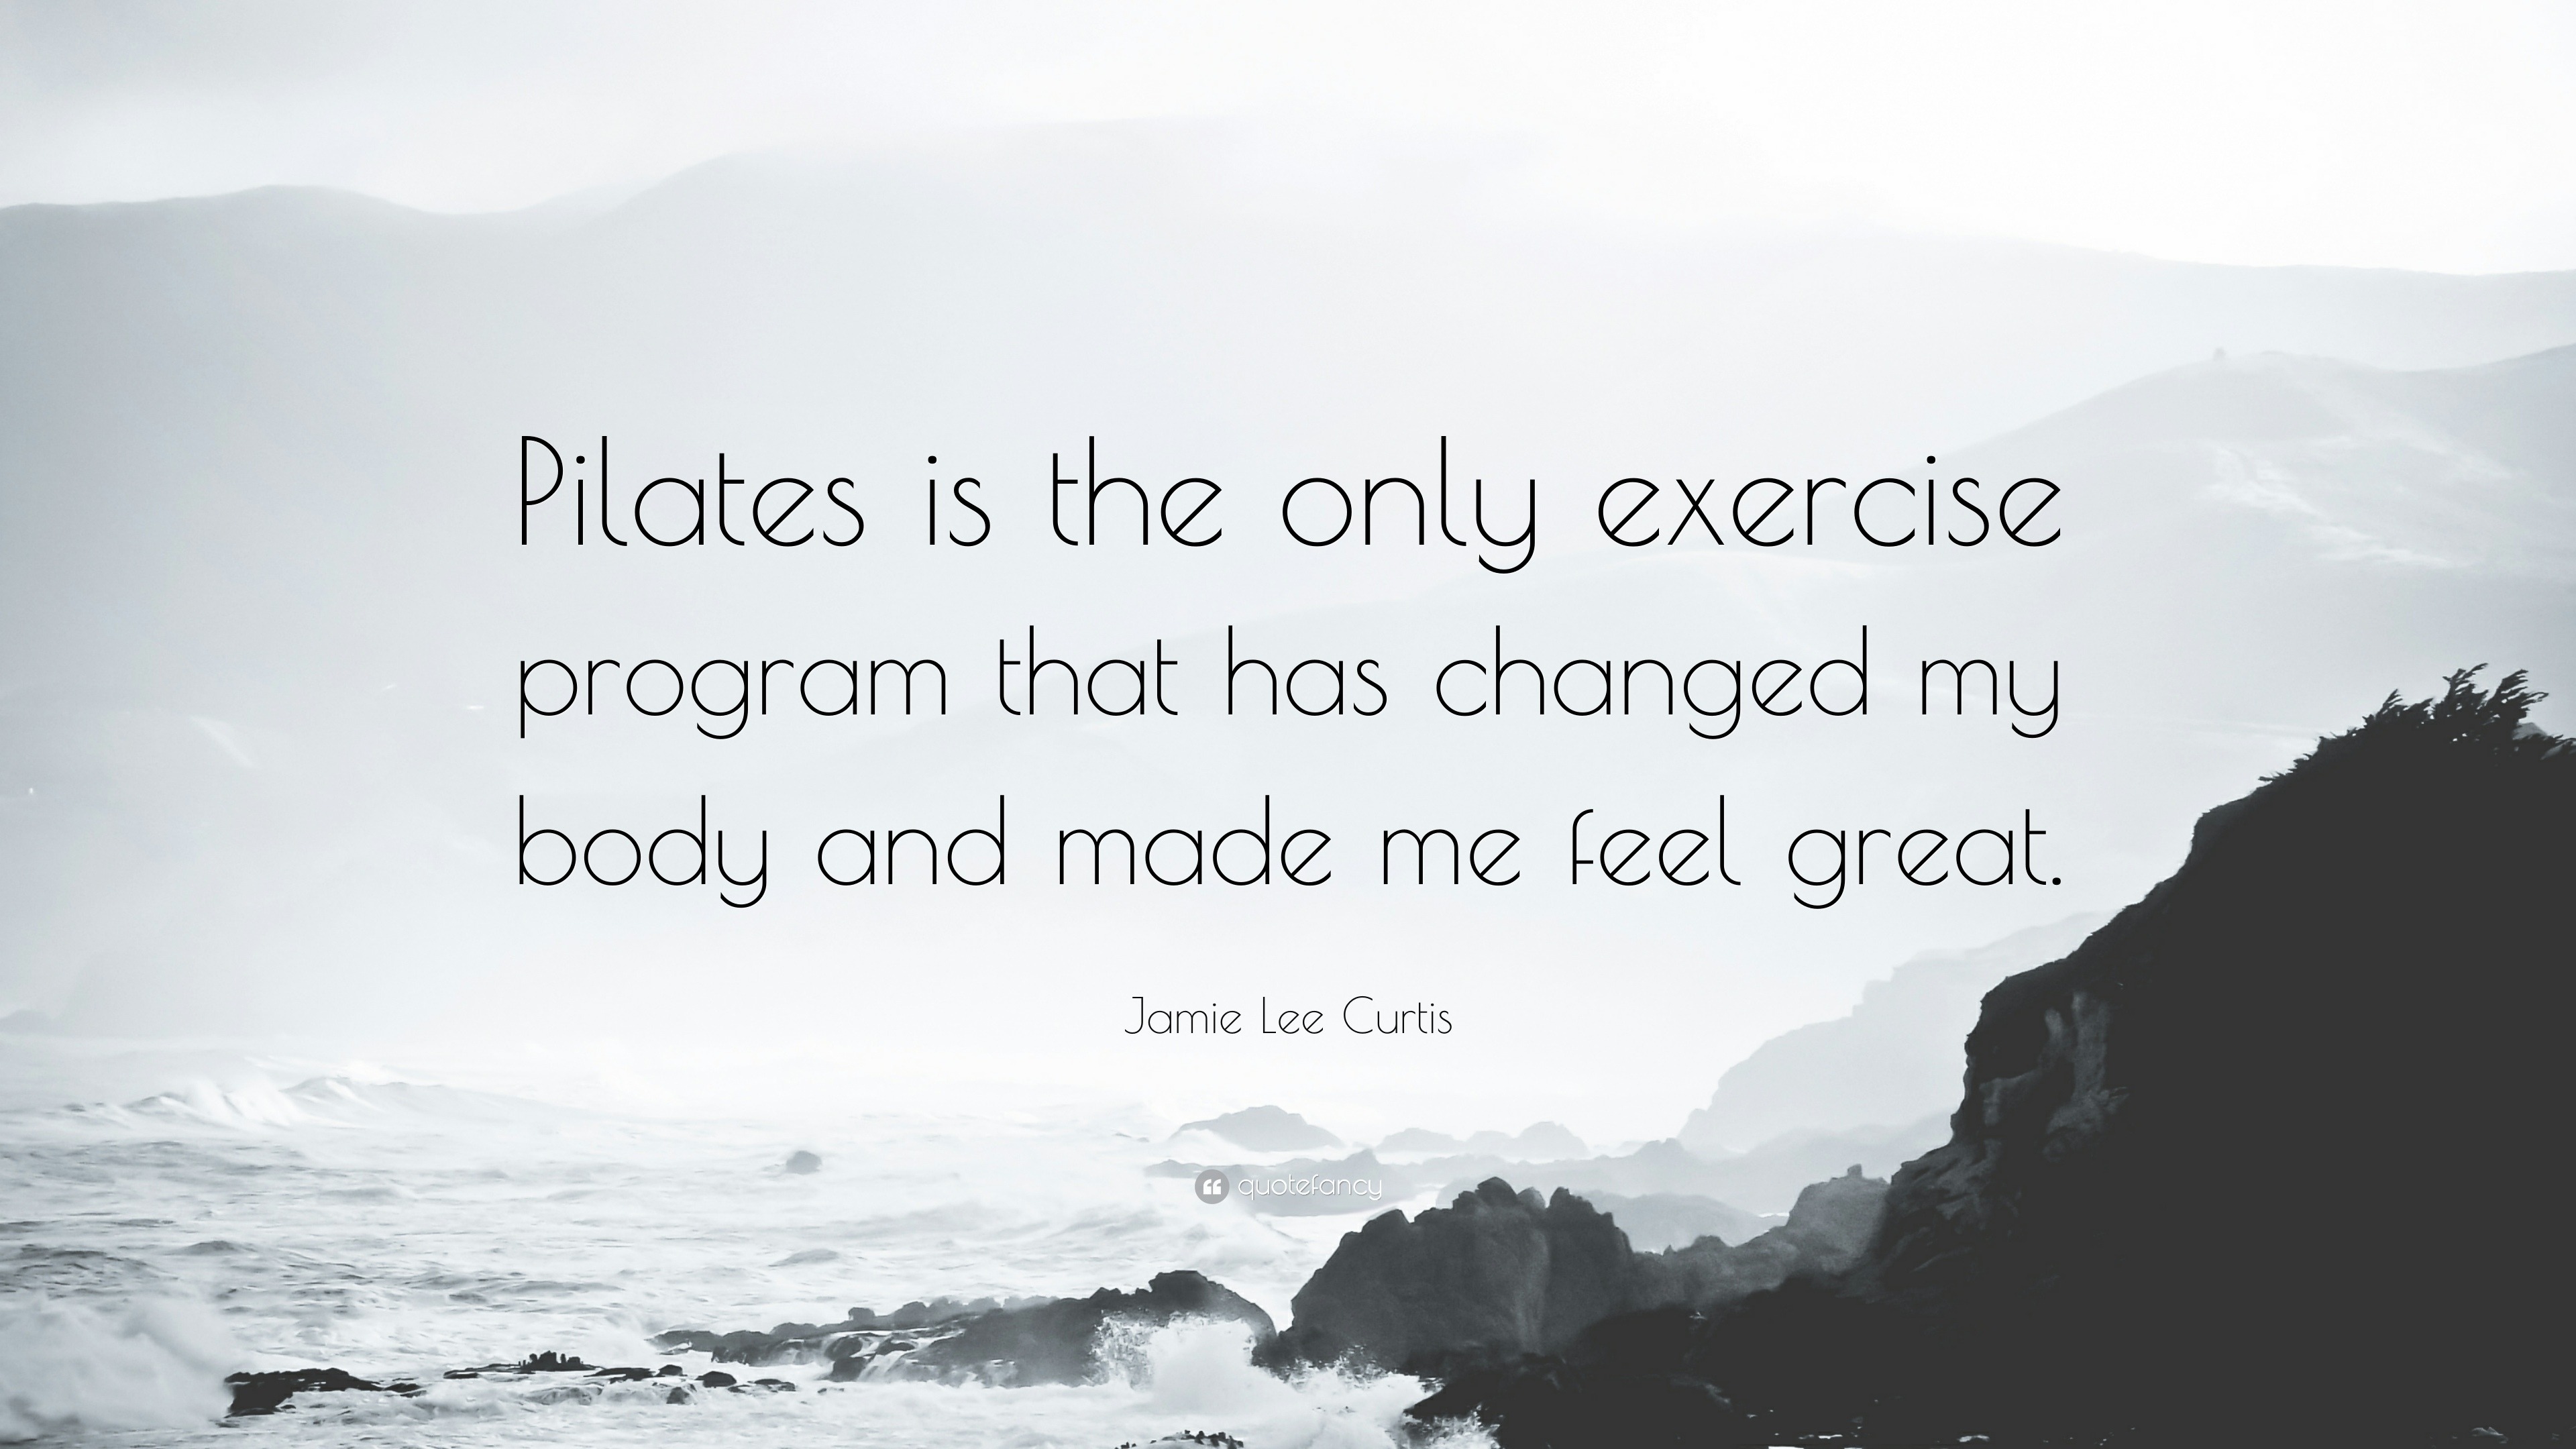 Pilates Place on X: This is why you do Pilates. #pilates #quote